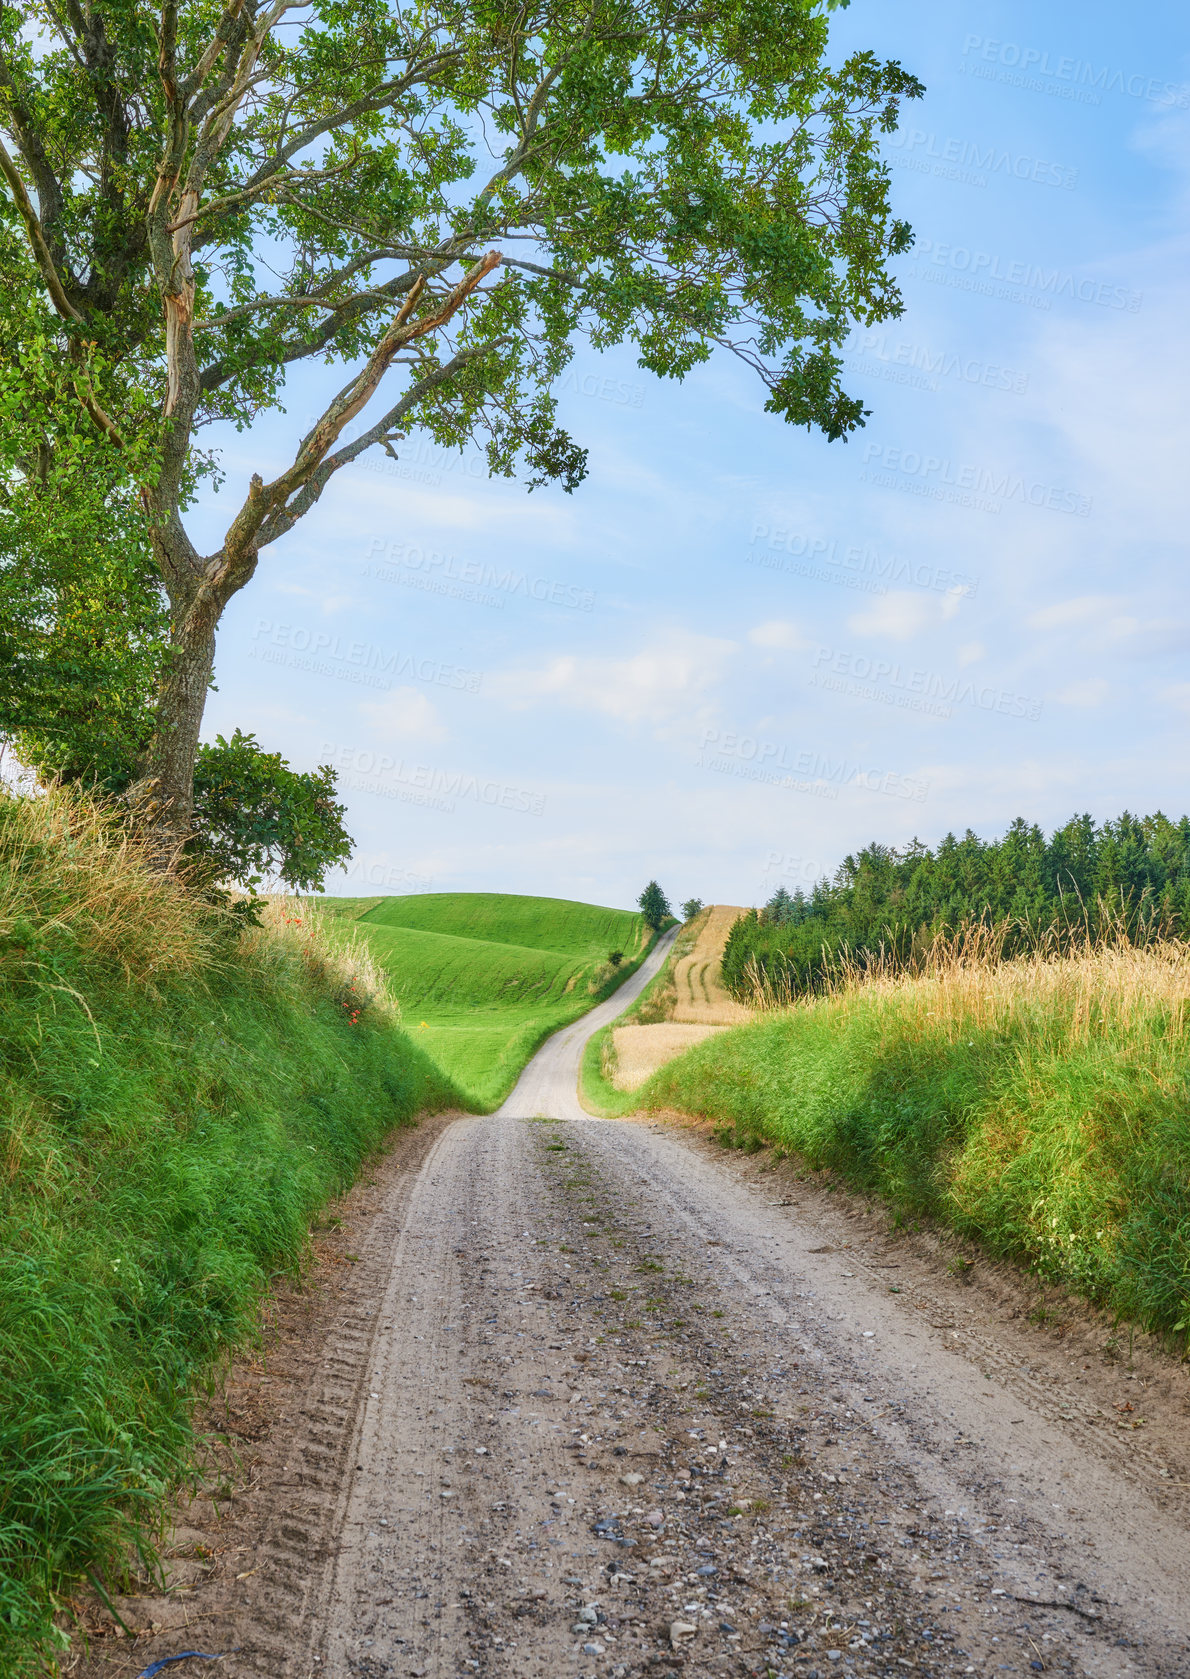 Buy stock photo Vibrant green grass and trees growing in the countryside in summertime. A dirt road leading to the soothing, quiet rural landscape. bright sunny day in farming fields, lush green organic growth 